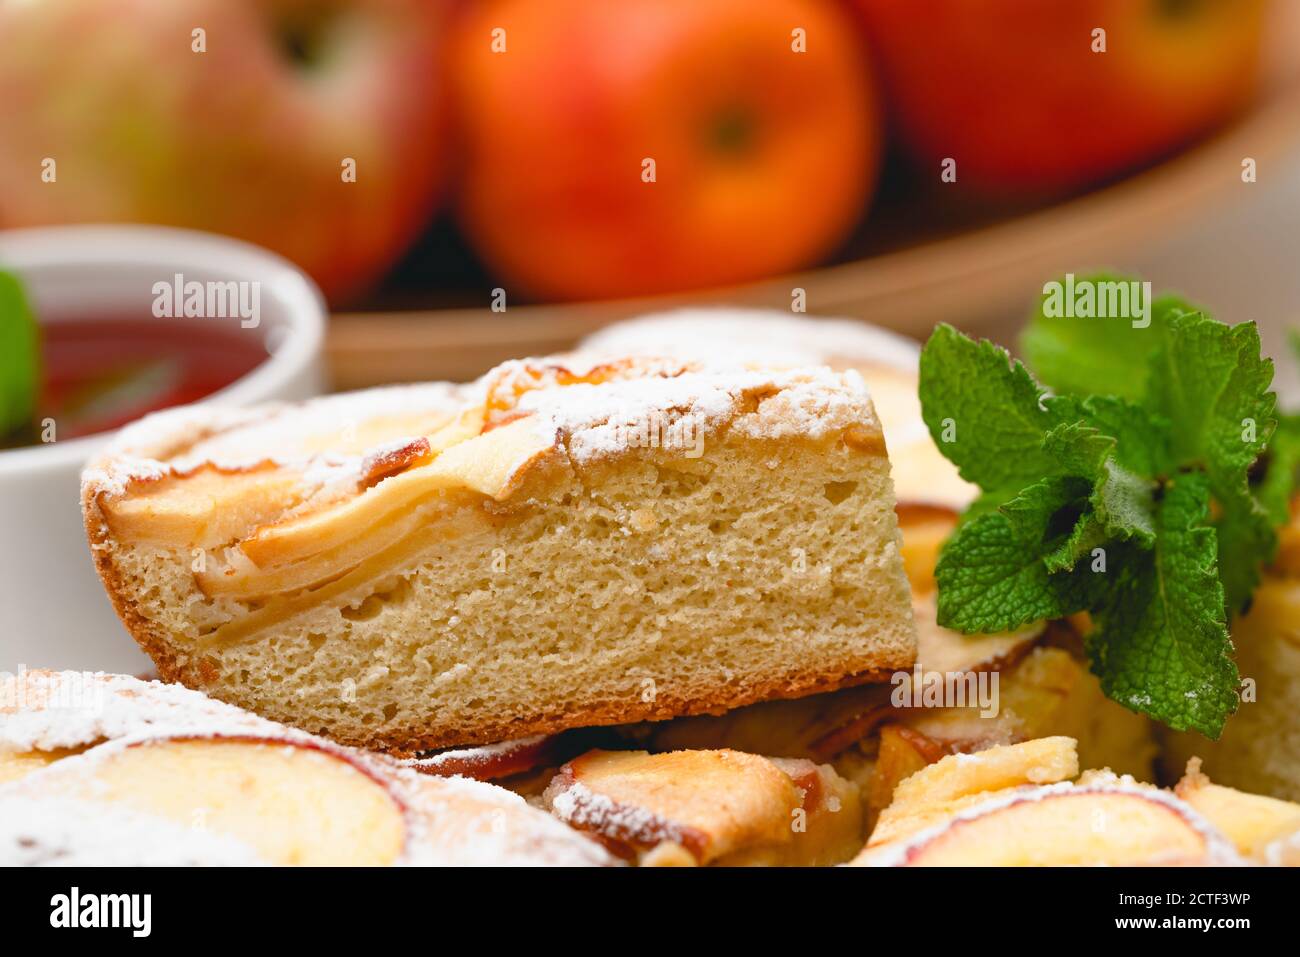 Frsh baked apple pie and cup of herbal tea with mint leaves close up on white background Stock Photo